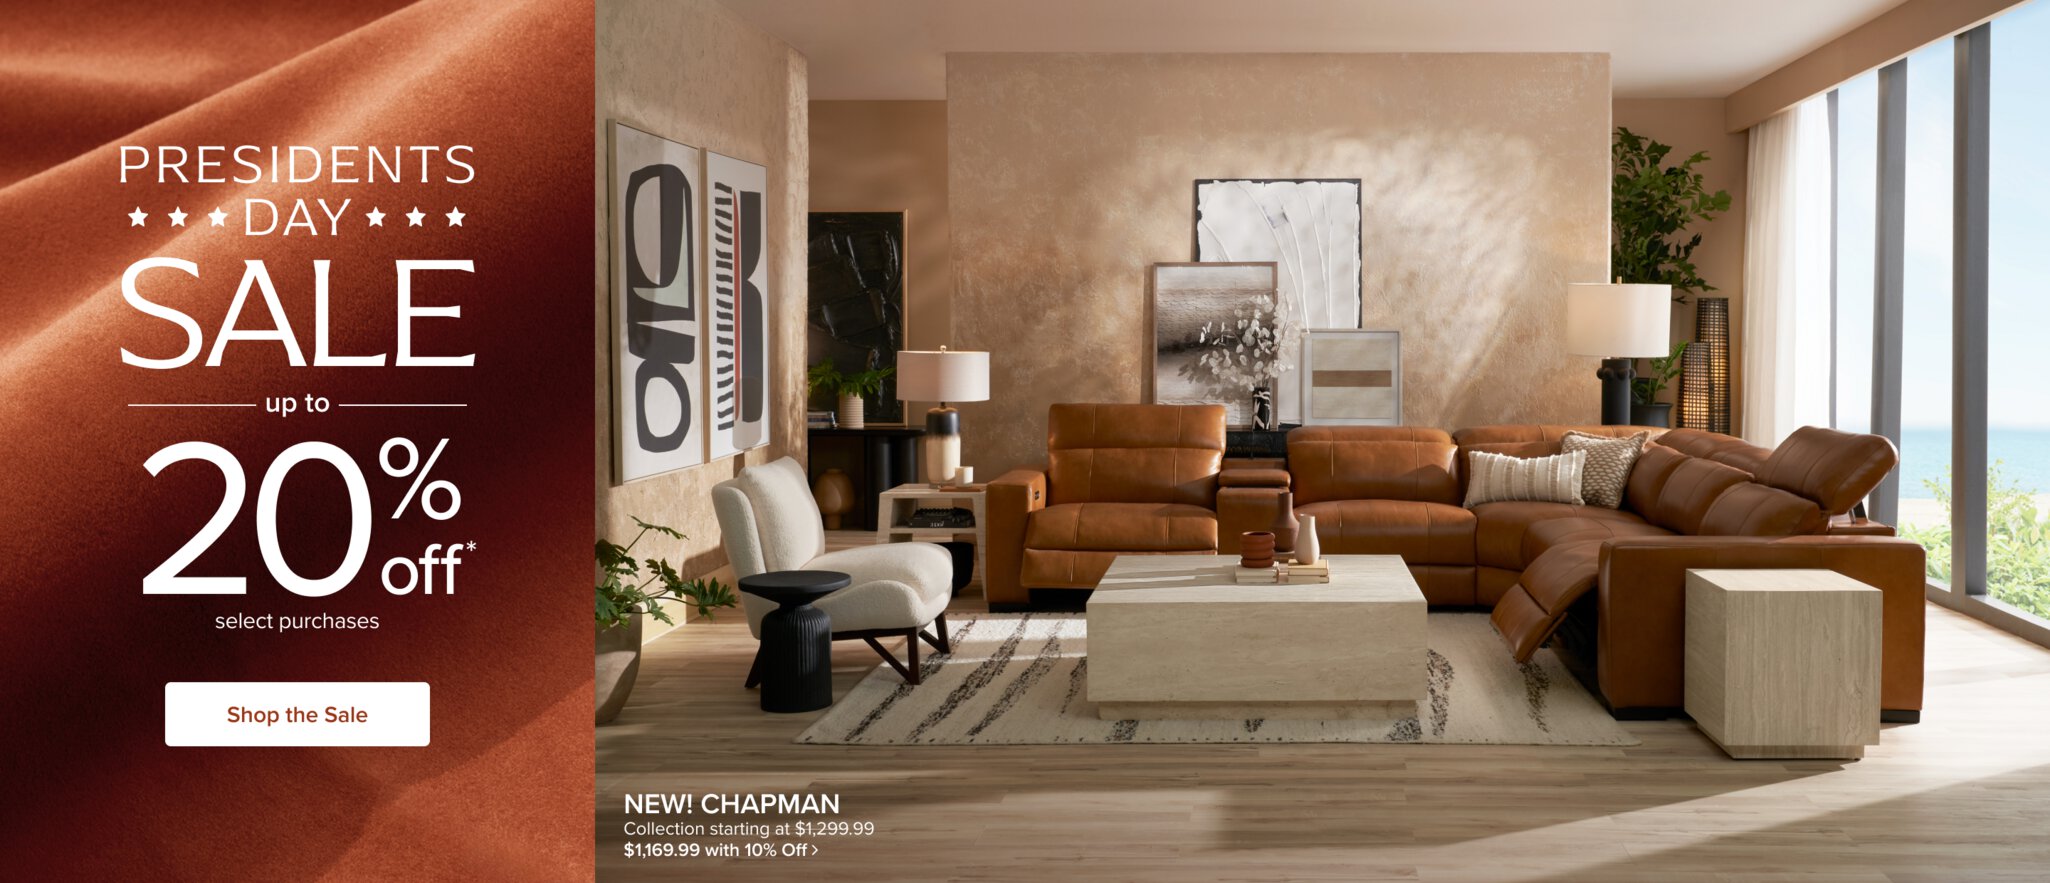 Chapman Collection starting at $1,1699.99 with 10% Off